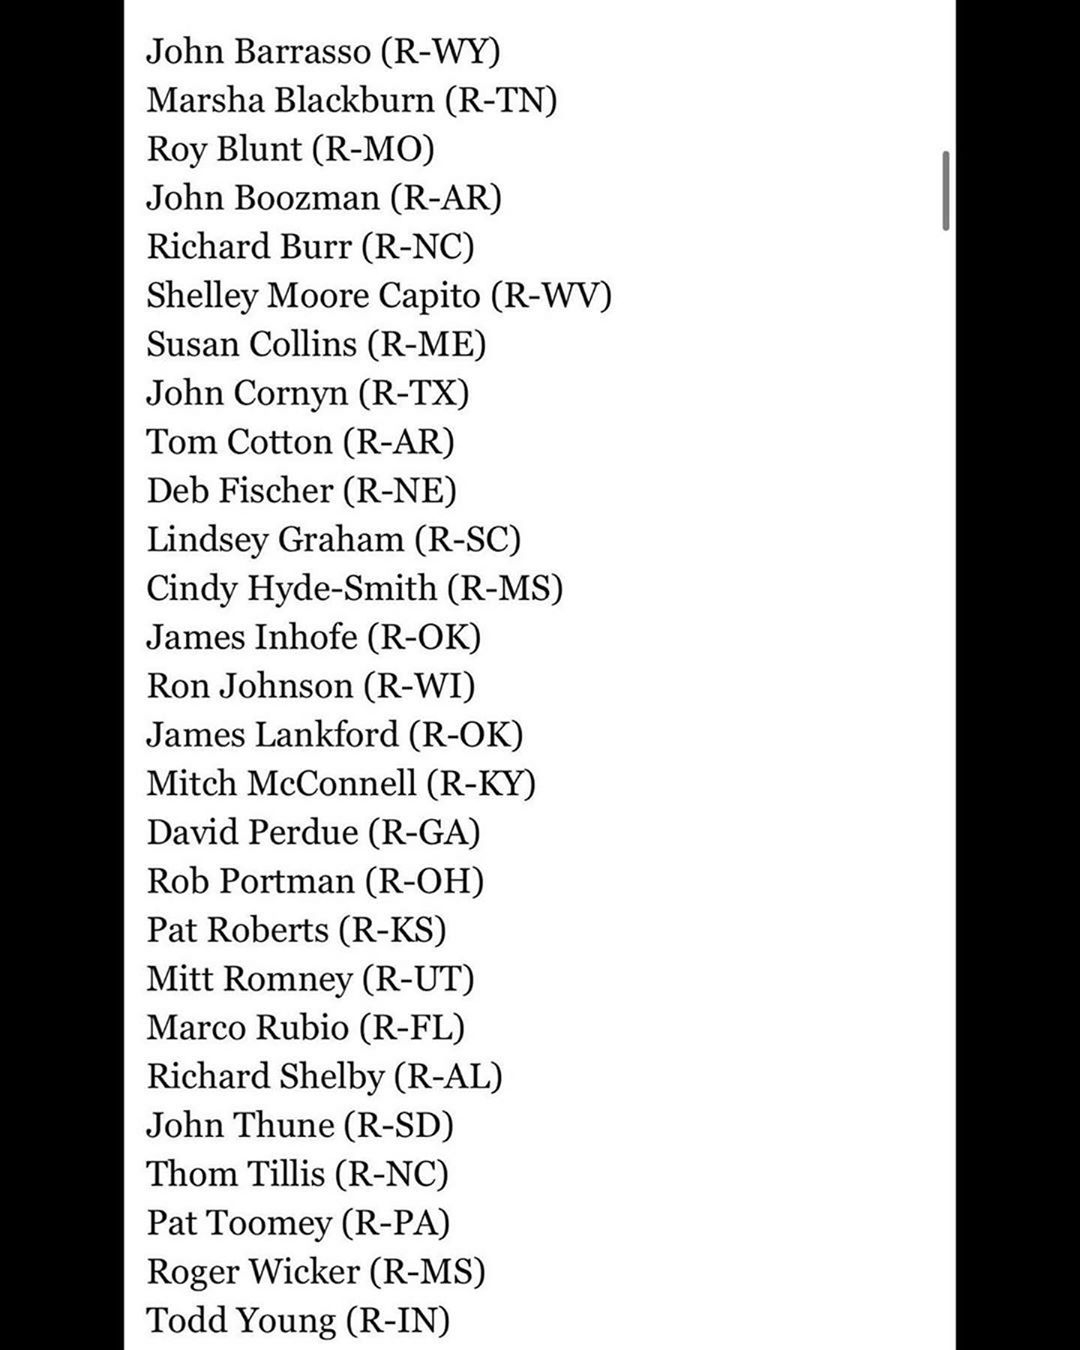 Republicans Who Voted Against an Amendment to Keep Feds Out of Citizens Search History - Fails By 1 Vote